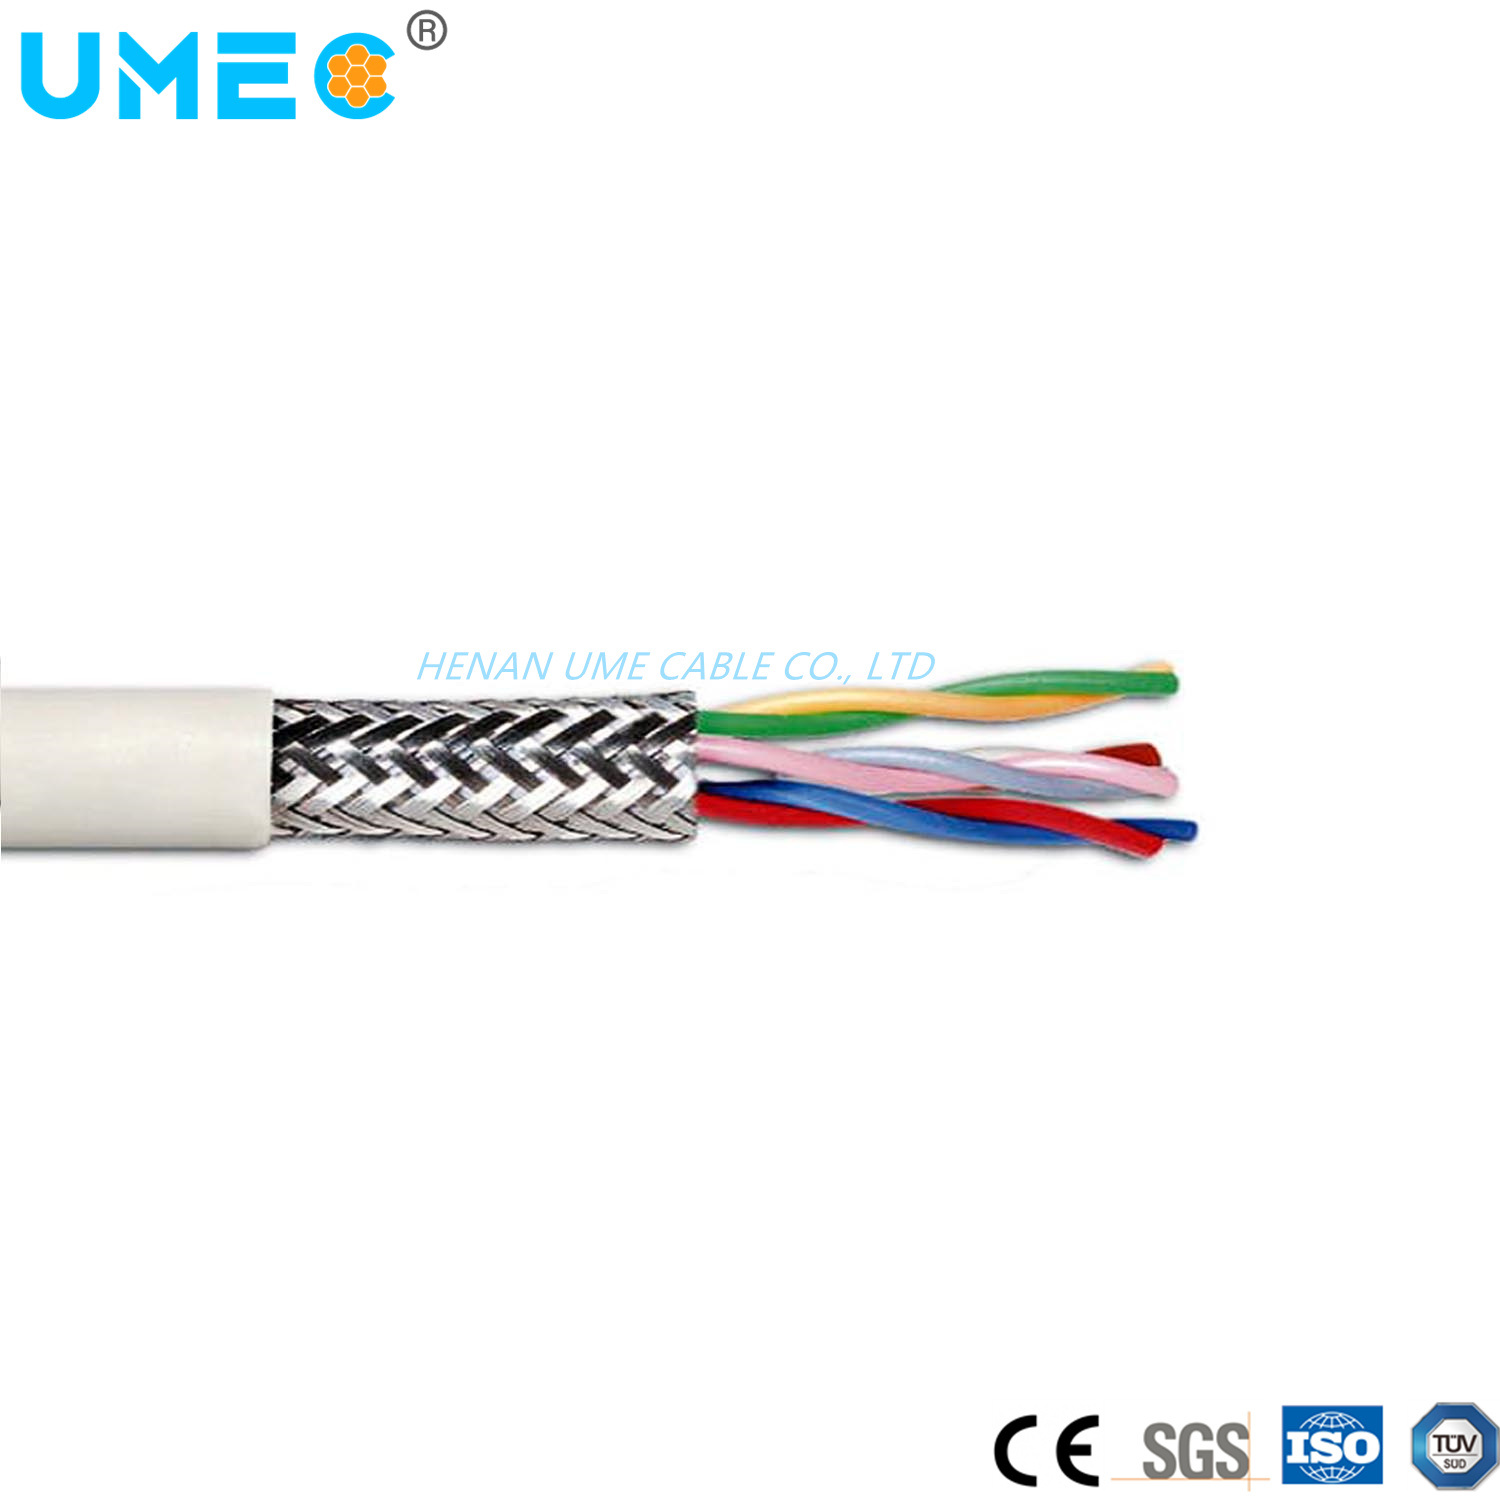 Liycy Shilded Signal and Control Cable Liycyc Cable